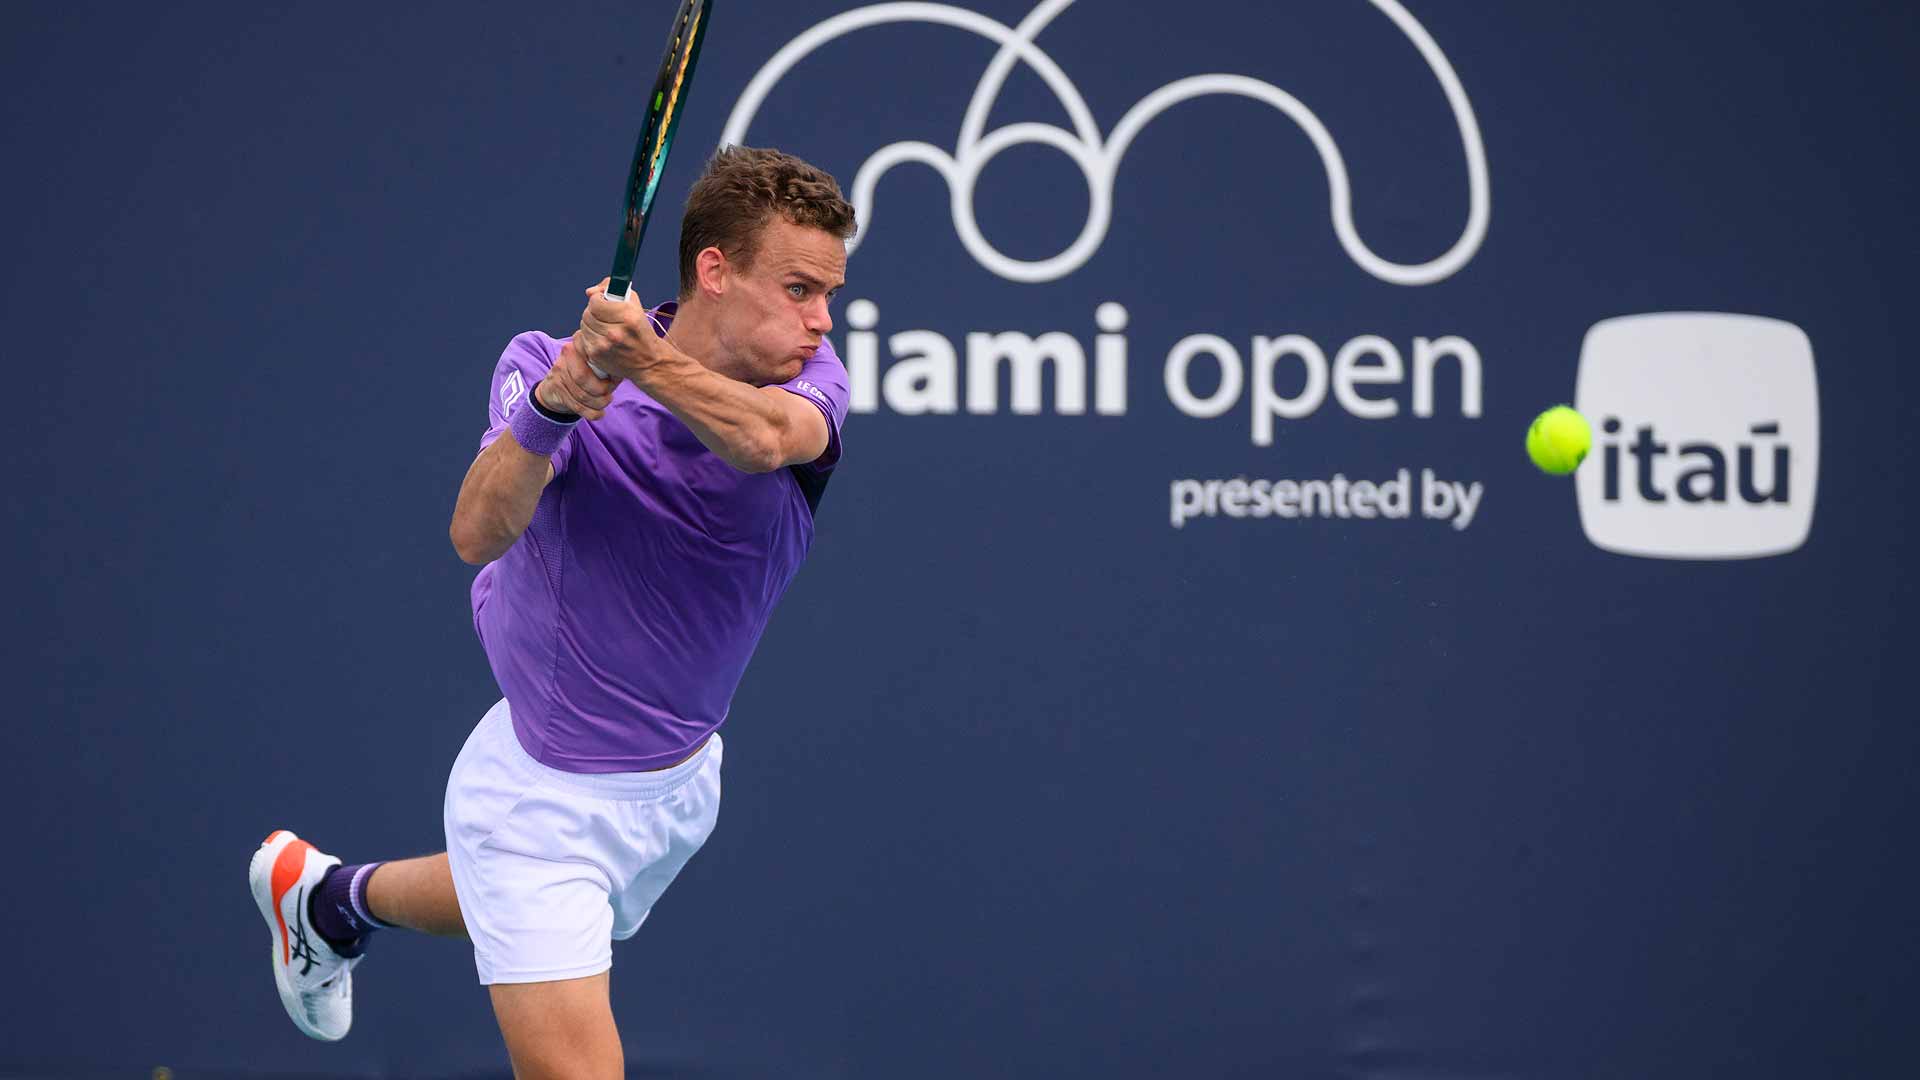 Luca Van Assche advances to the second round in Miami Wednesday with a straight-sets win against Pavel Kotov.